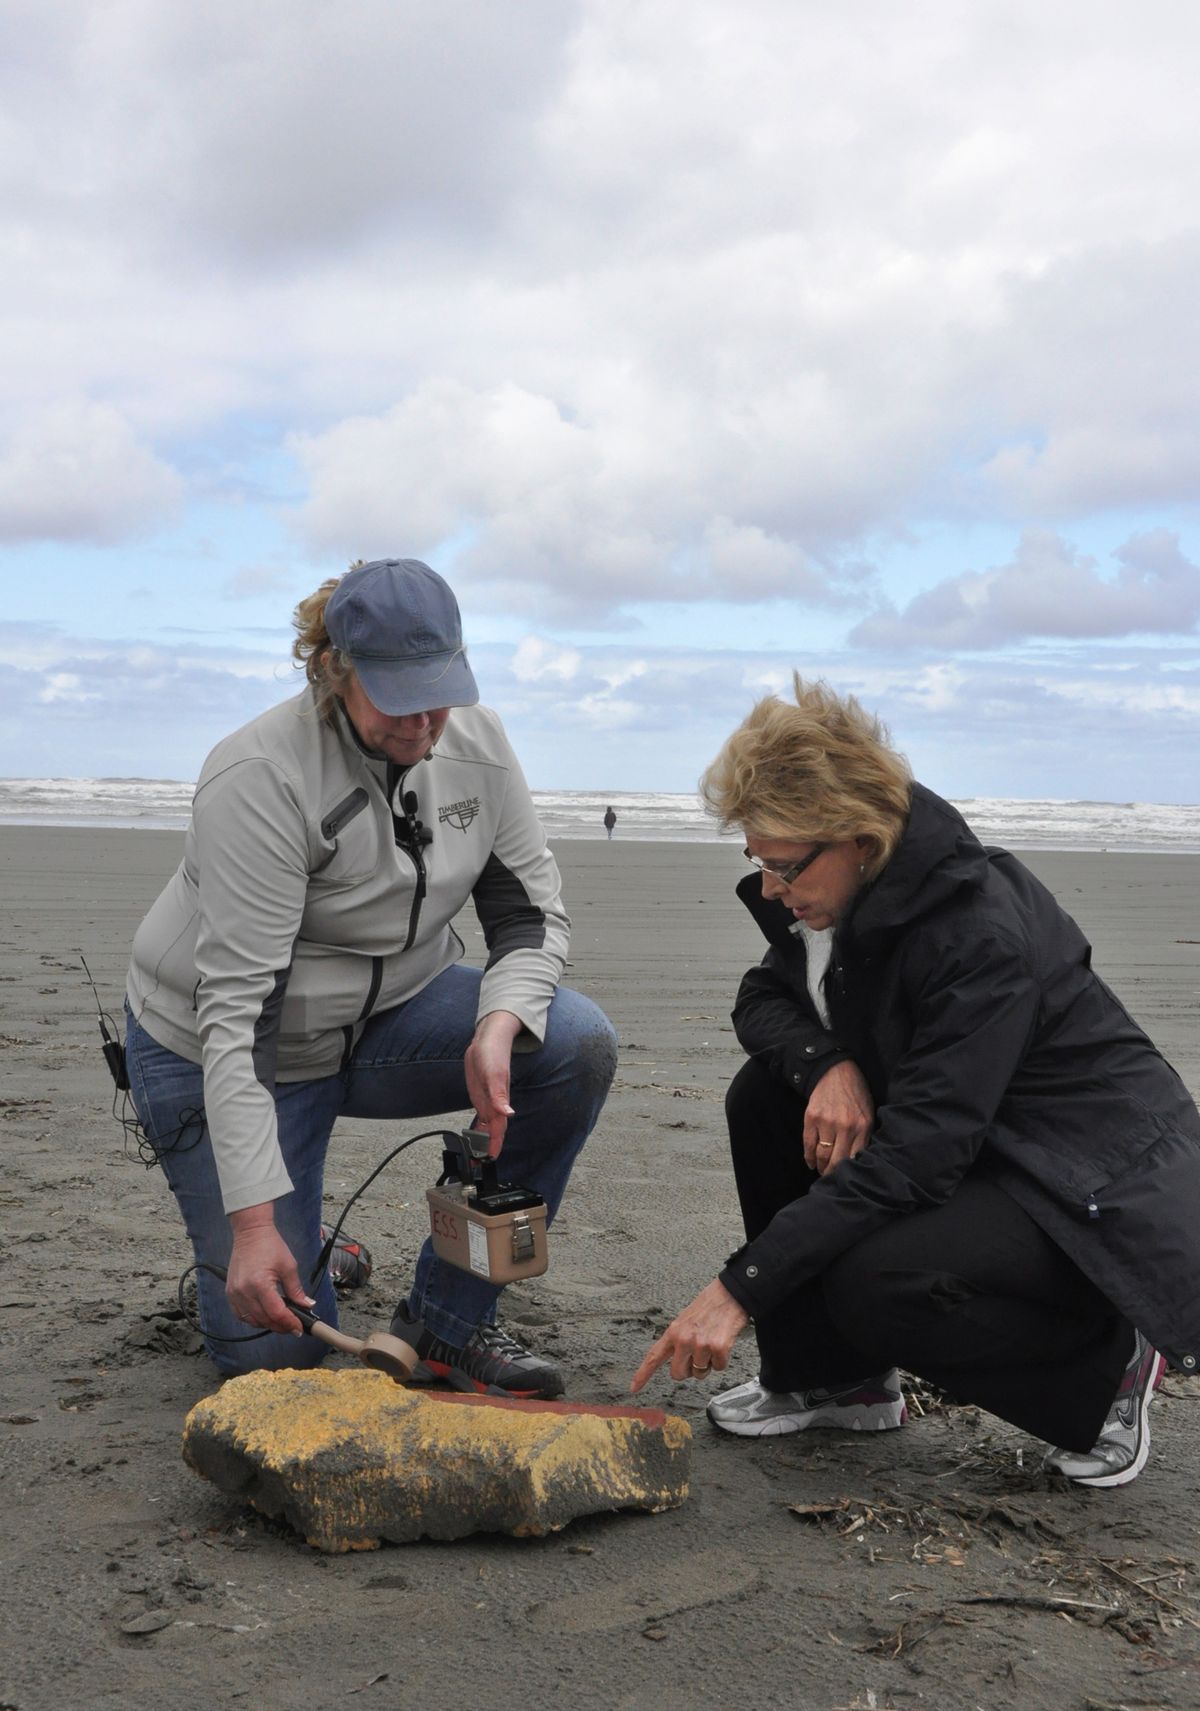 Lynn Albin, a radiation expert from the state Department of Health, explains to Gov. Chris Gregoire, right, how state workers check some suspected tsunami debris by running a Geiger counter Monday morning over a piece of Styrofoam that washed up on the beach. (Jim Camden)